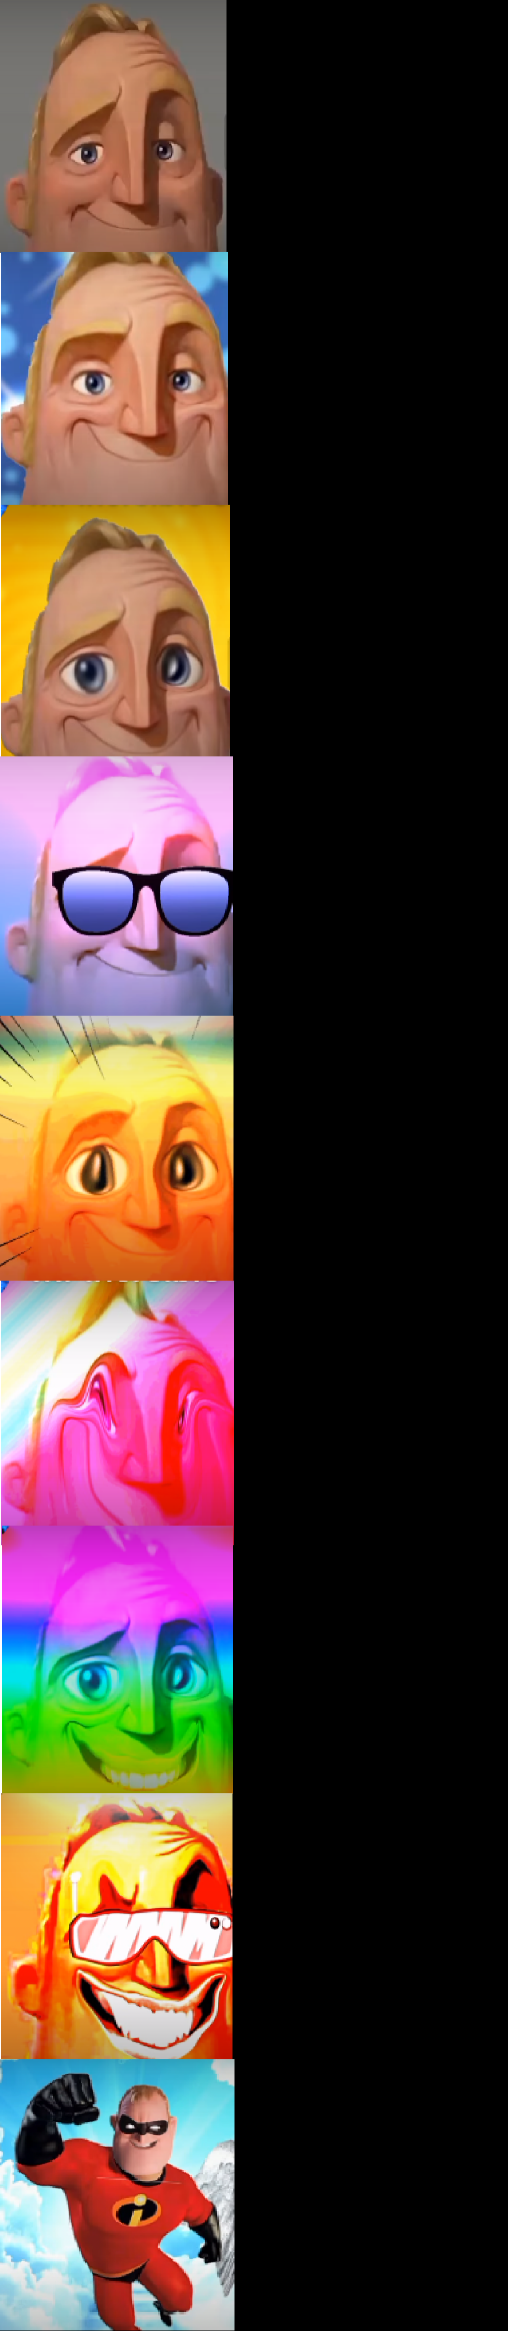 Mr Incredible becoming entertained Blank Meme Template